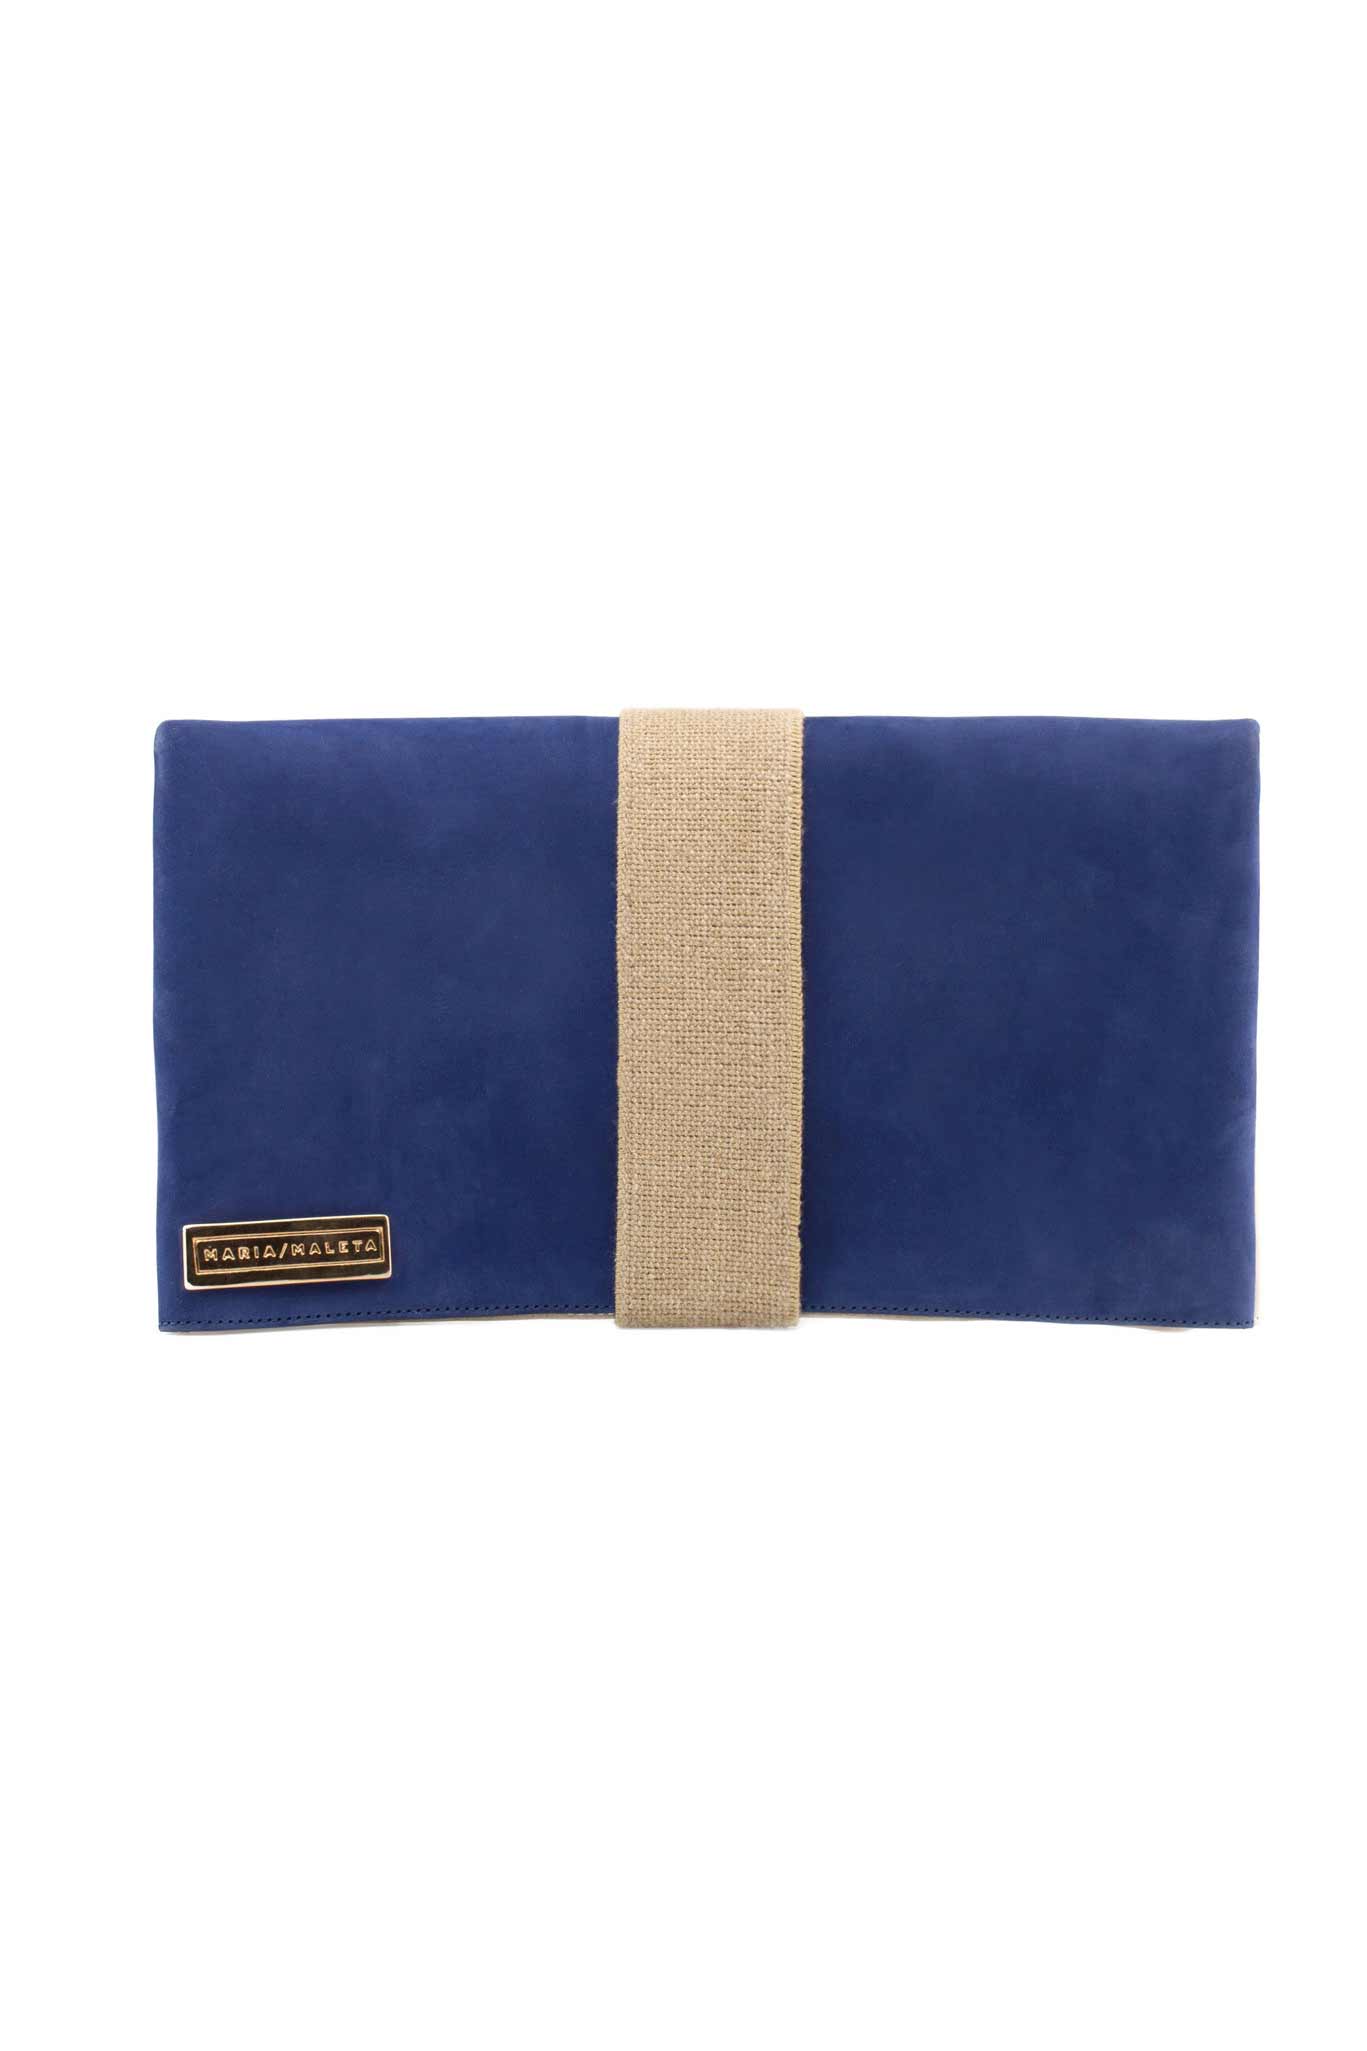 Navy Blue and Gold Clutch